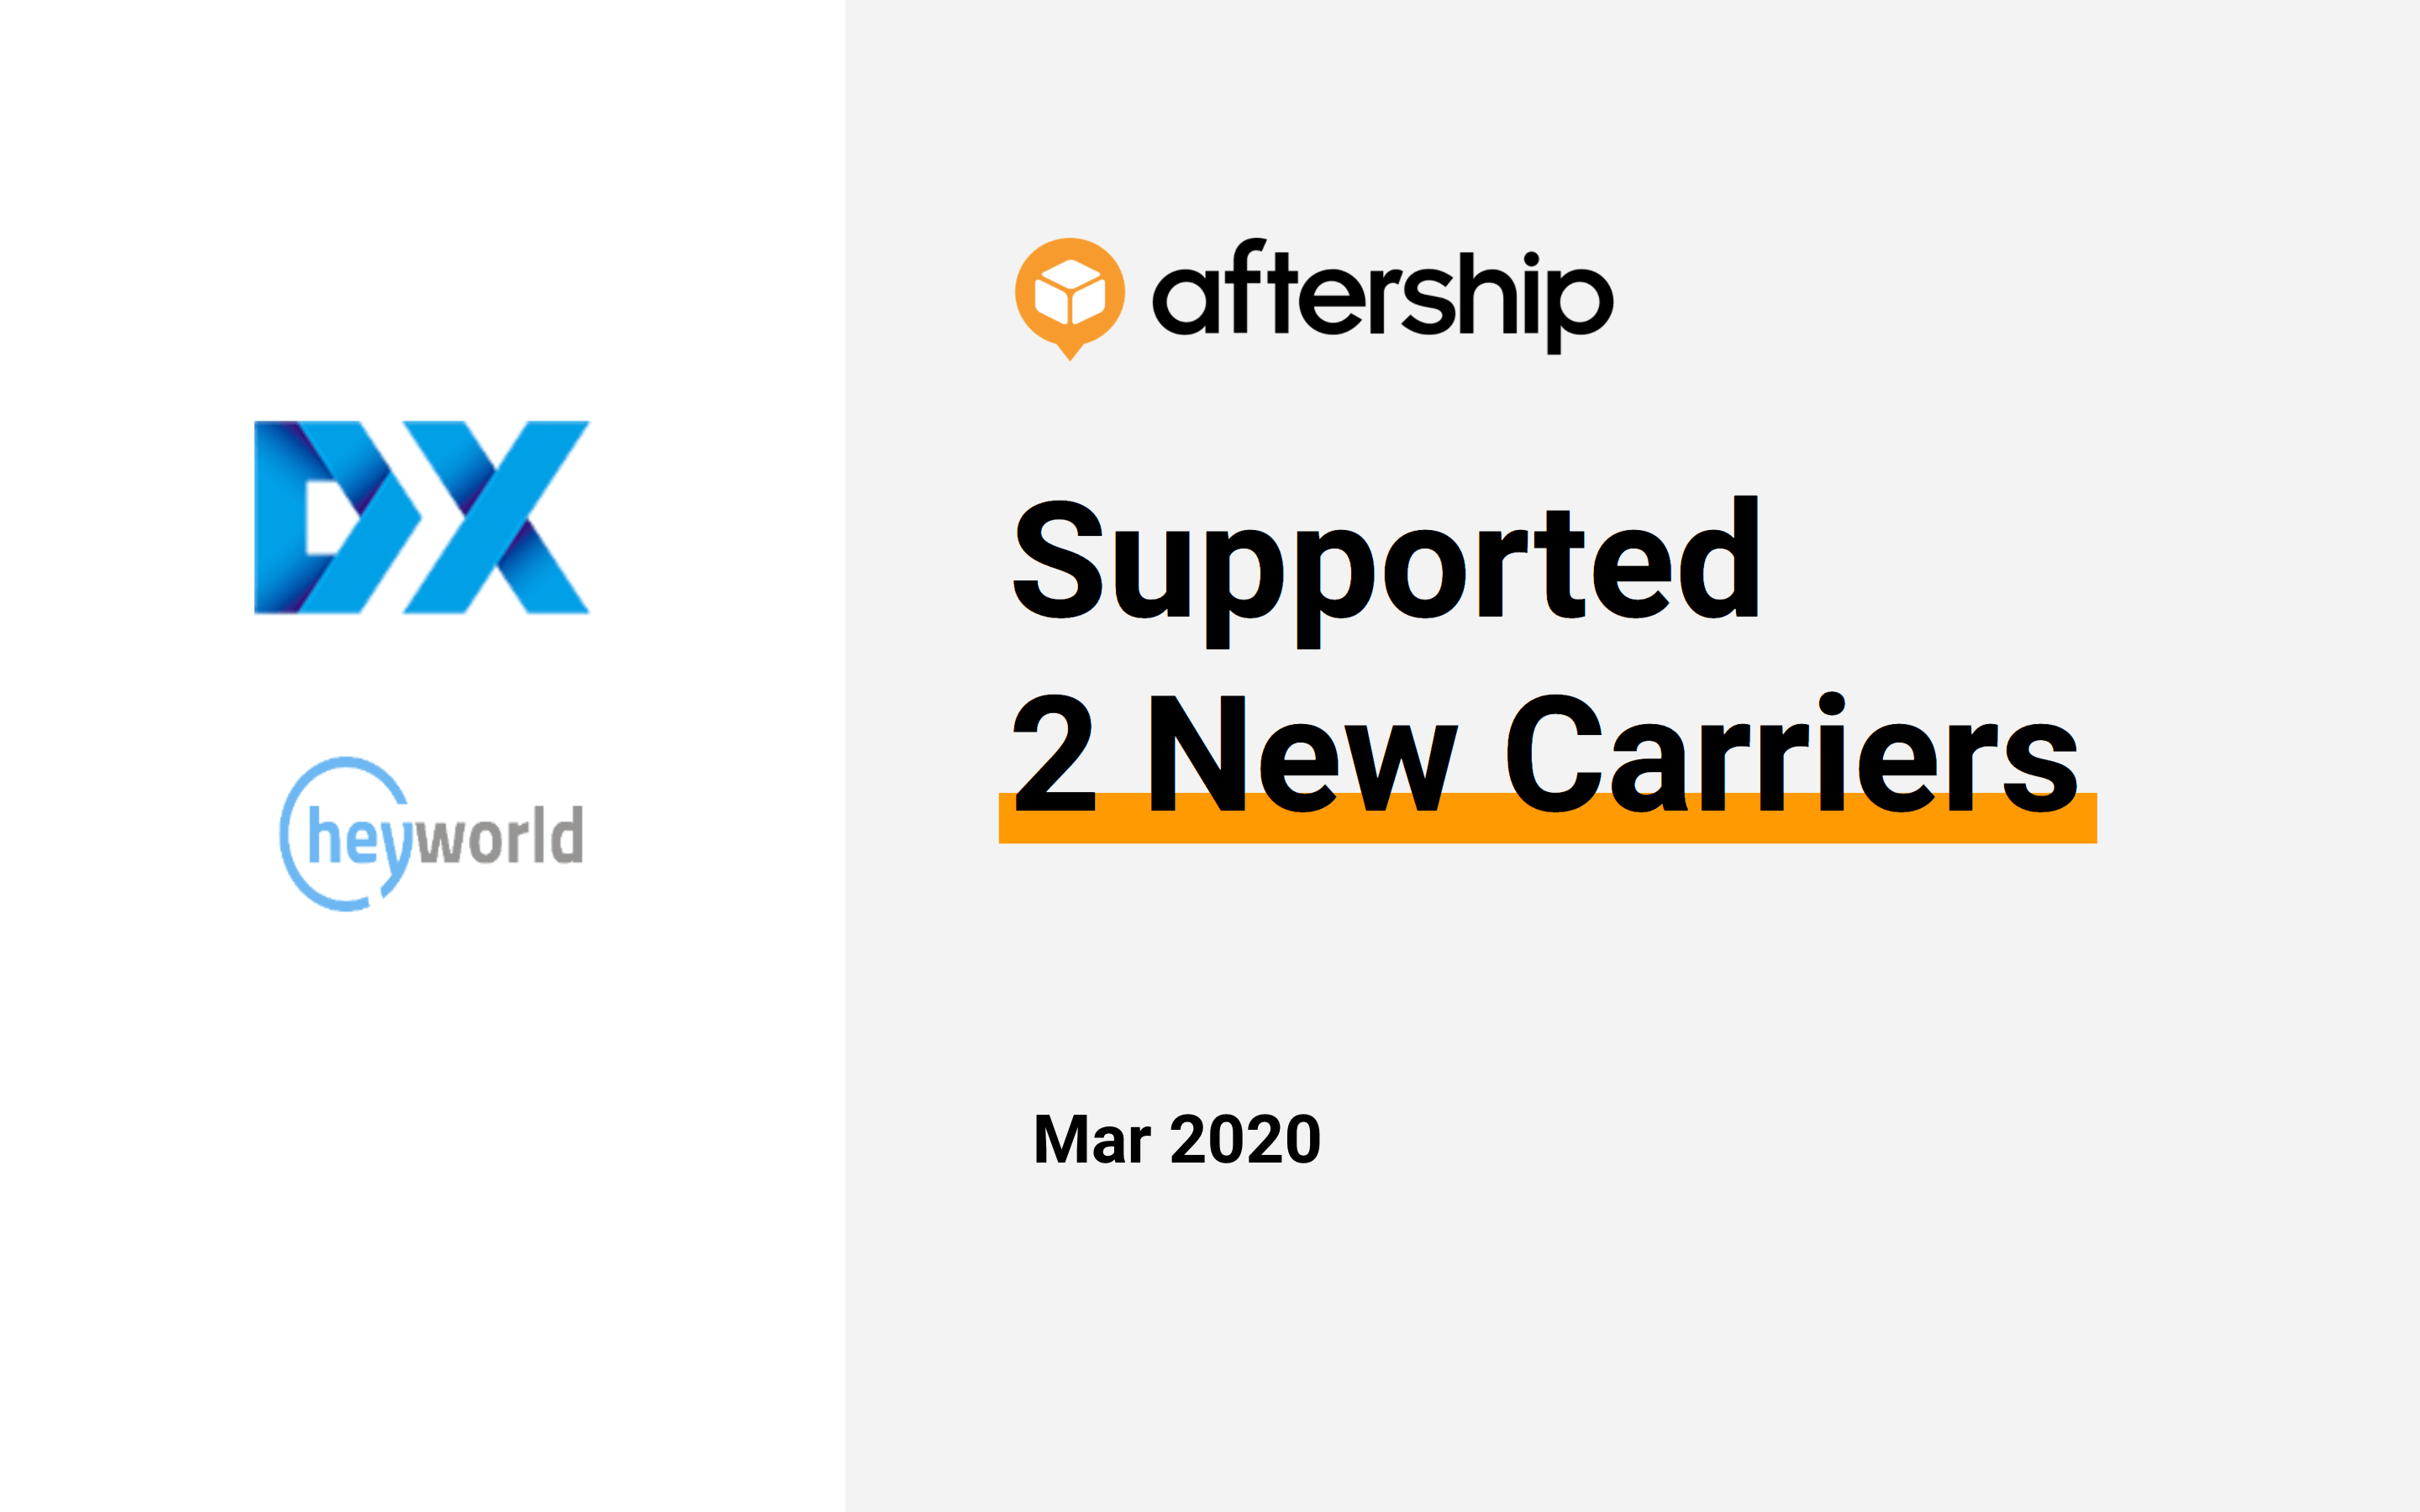 AfterShip added 2 new carriers this week (23 Mar 2020 to 27 Mar 2020)